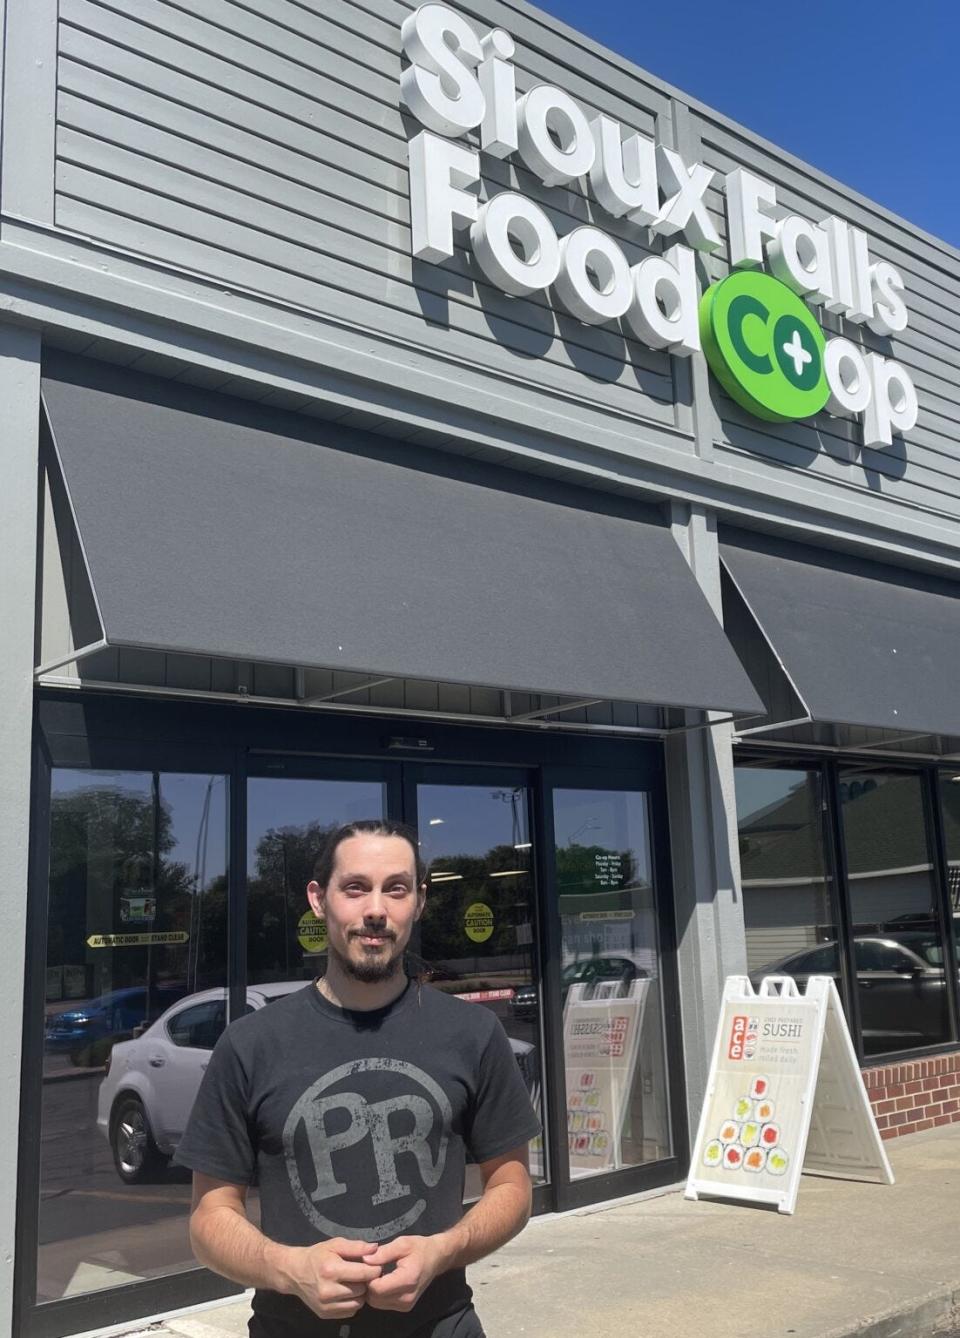 Trey Wharton of Sioux Falls has made many financial sacrifices in order to afford to buy organic foods that are part of his vegan diet.